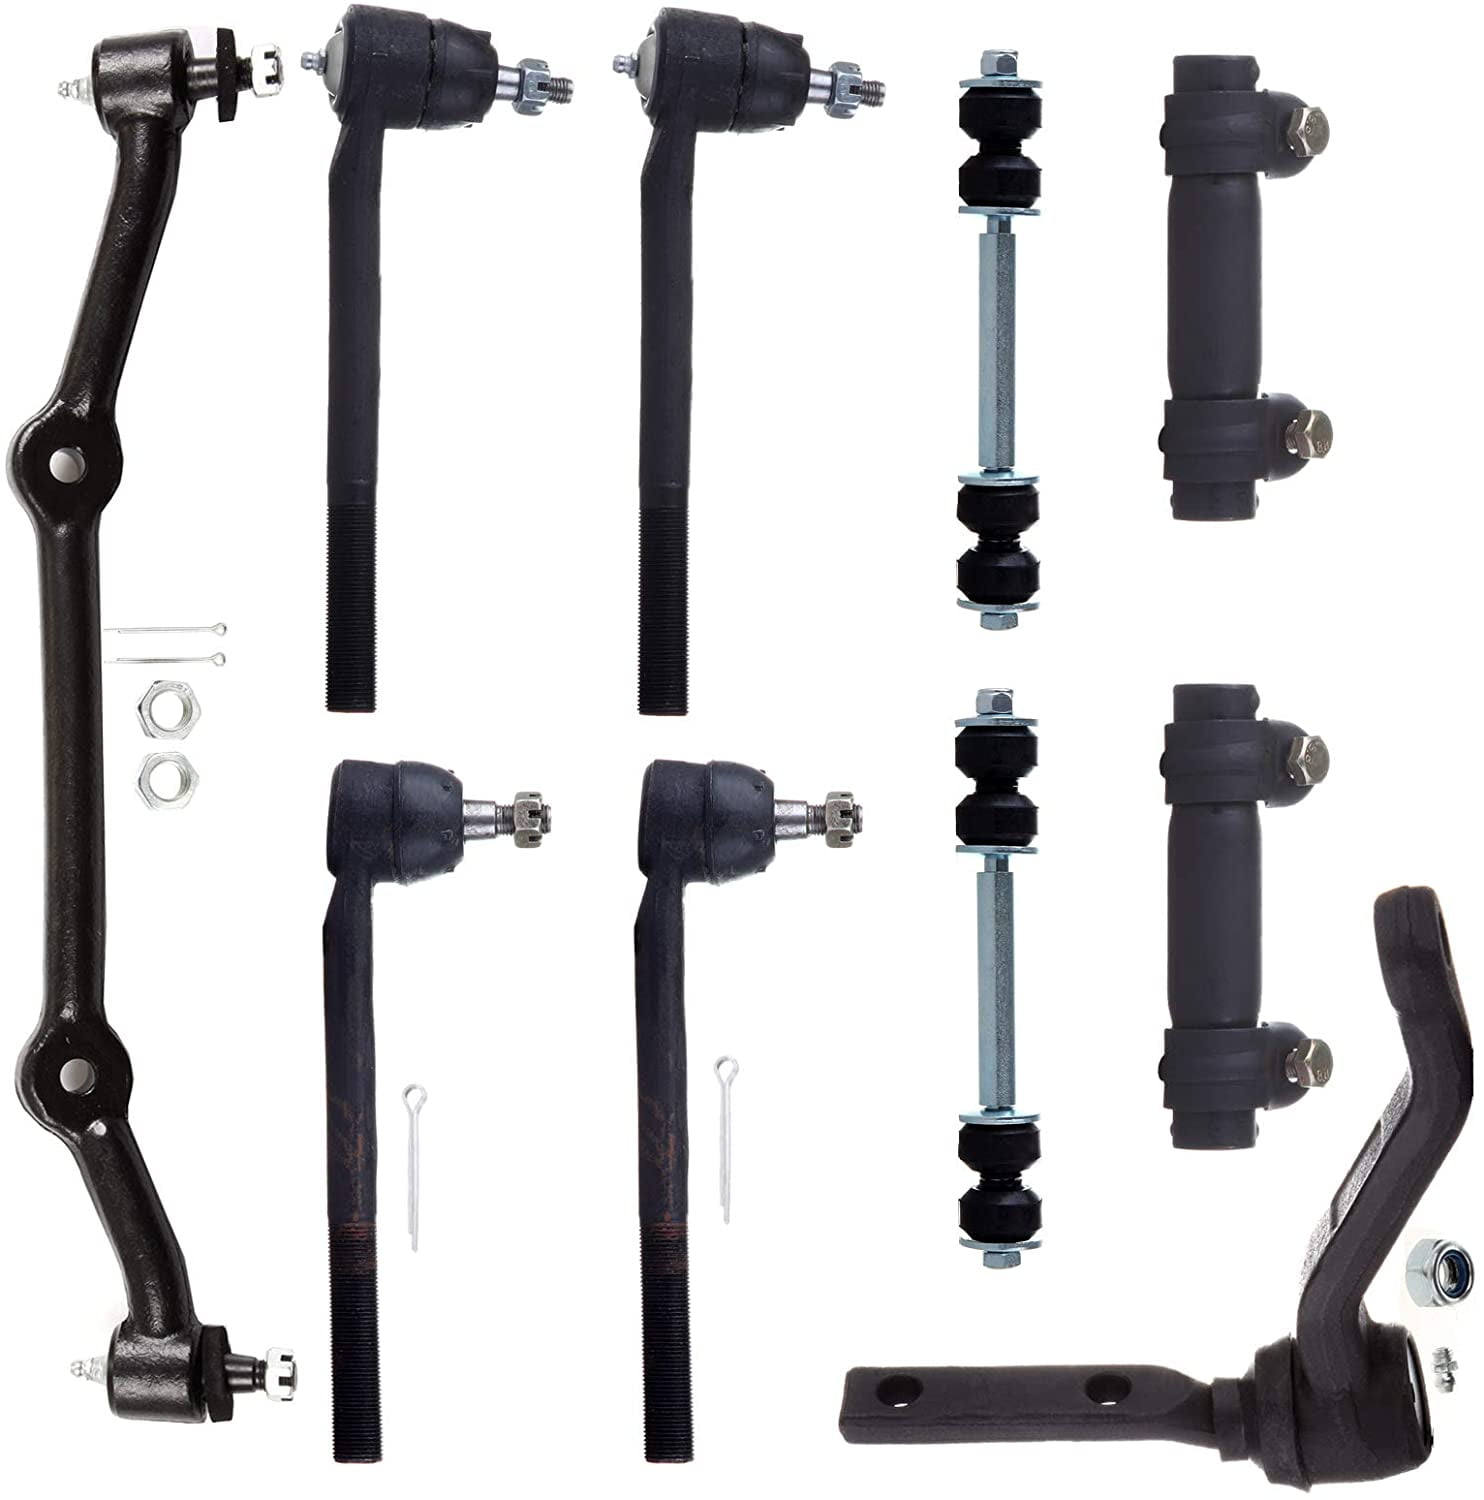 INEEDUP NEW 6 Set of Center Link RWD Front Sway Bar End Links Idler Arm Tie Rod Adjusting Sleeve Compatible with for Chevy Blazer S10 GMC Jimmy Sonoma Isuzu Hombre 